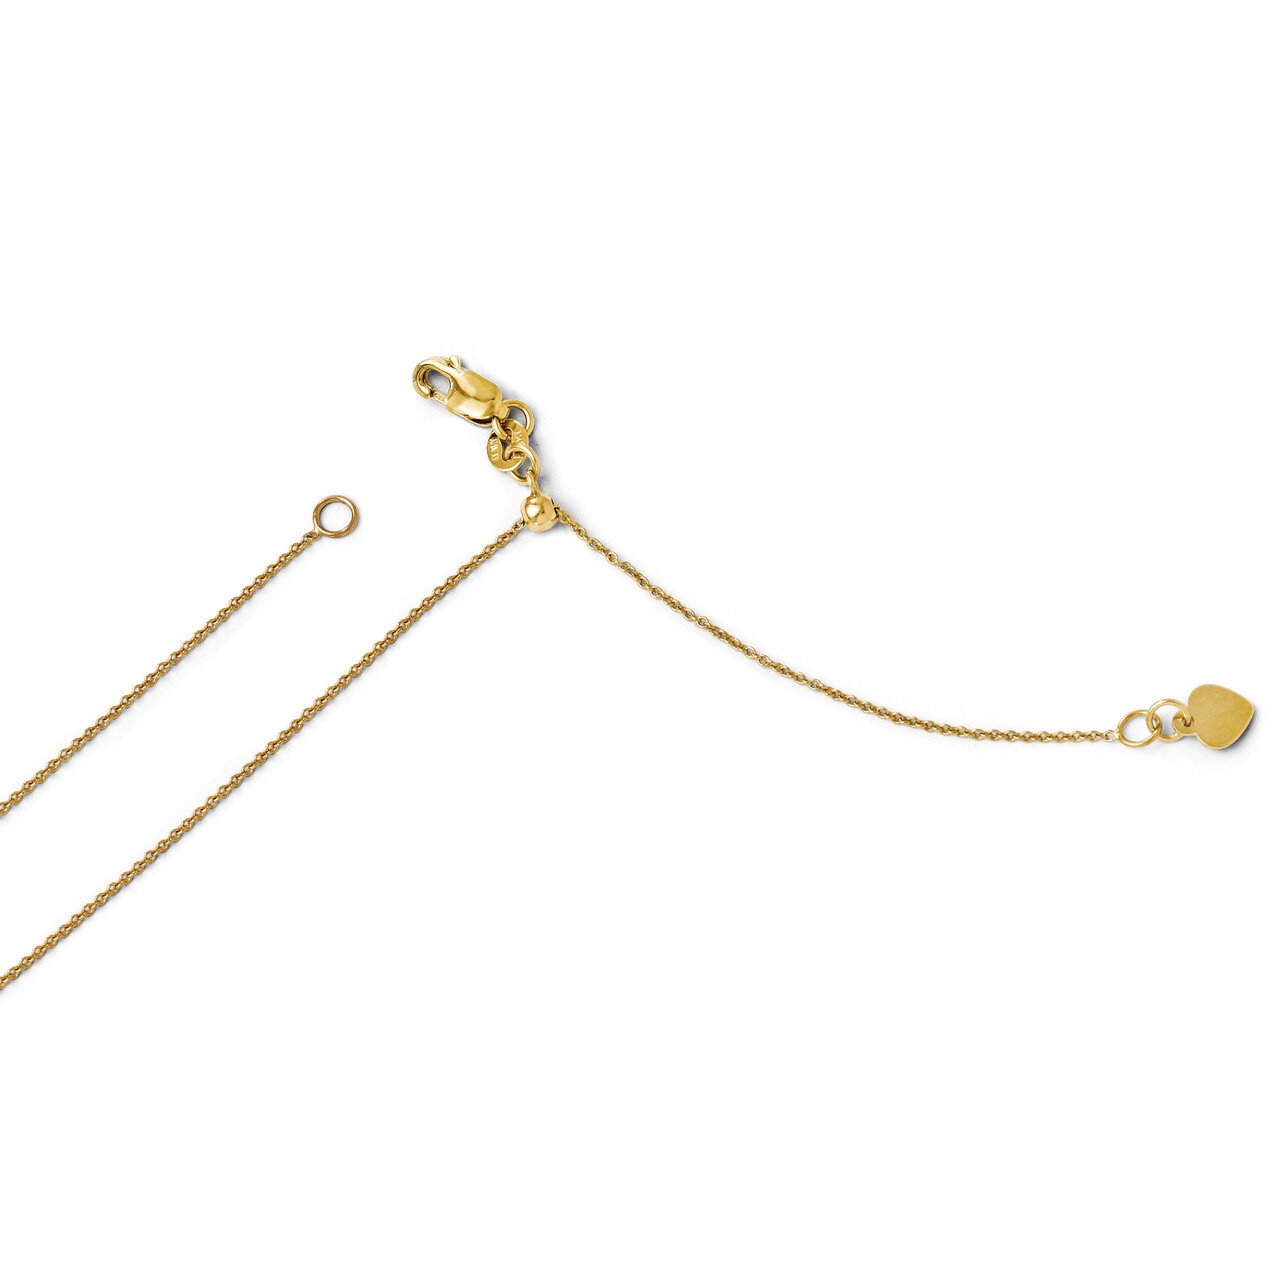 Adjustable Cable Chain 22 Inch - 14k Gold HB-1218-22